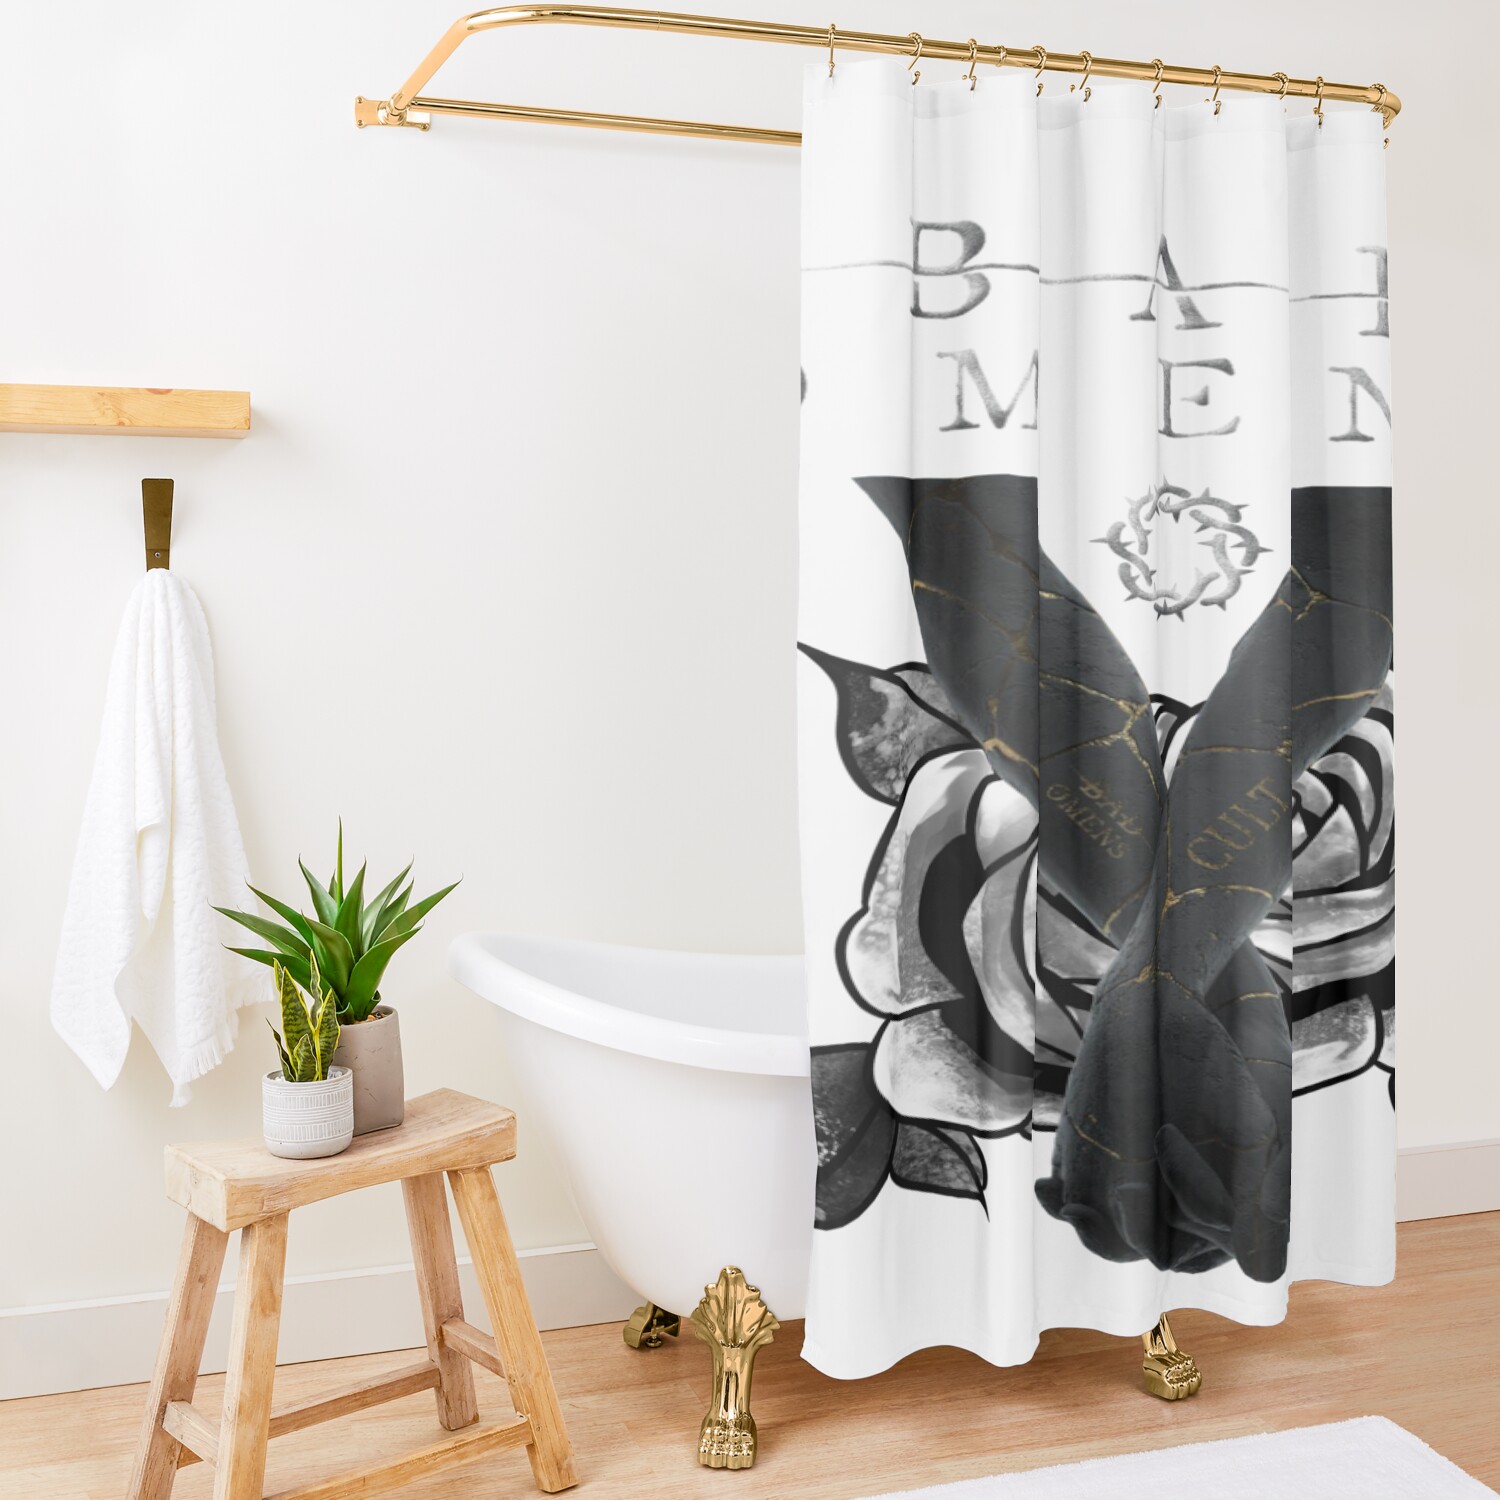 urshower curtain opensquare1500x1500 10 - Bad Omens Shop